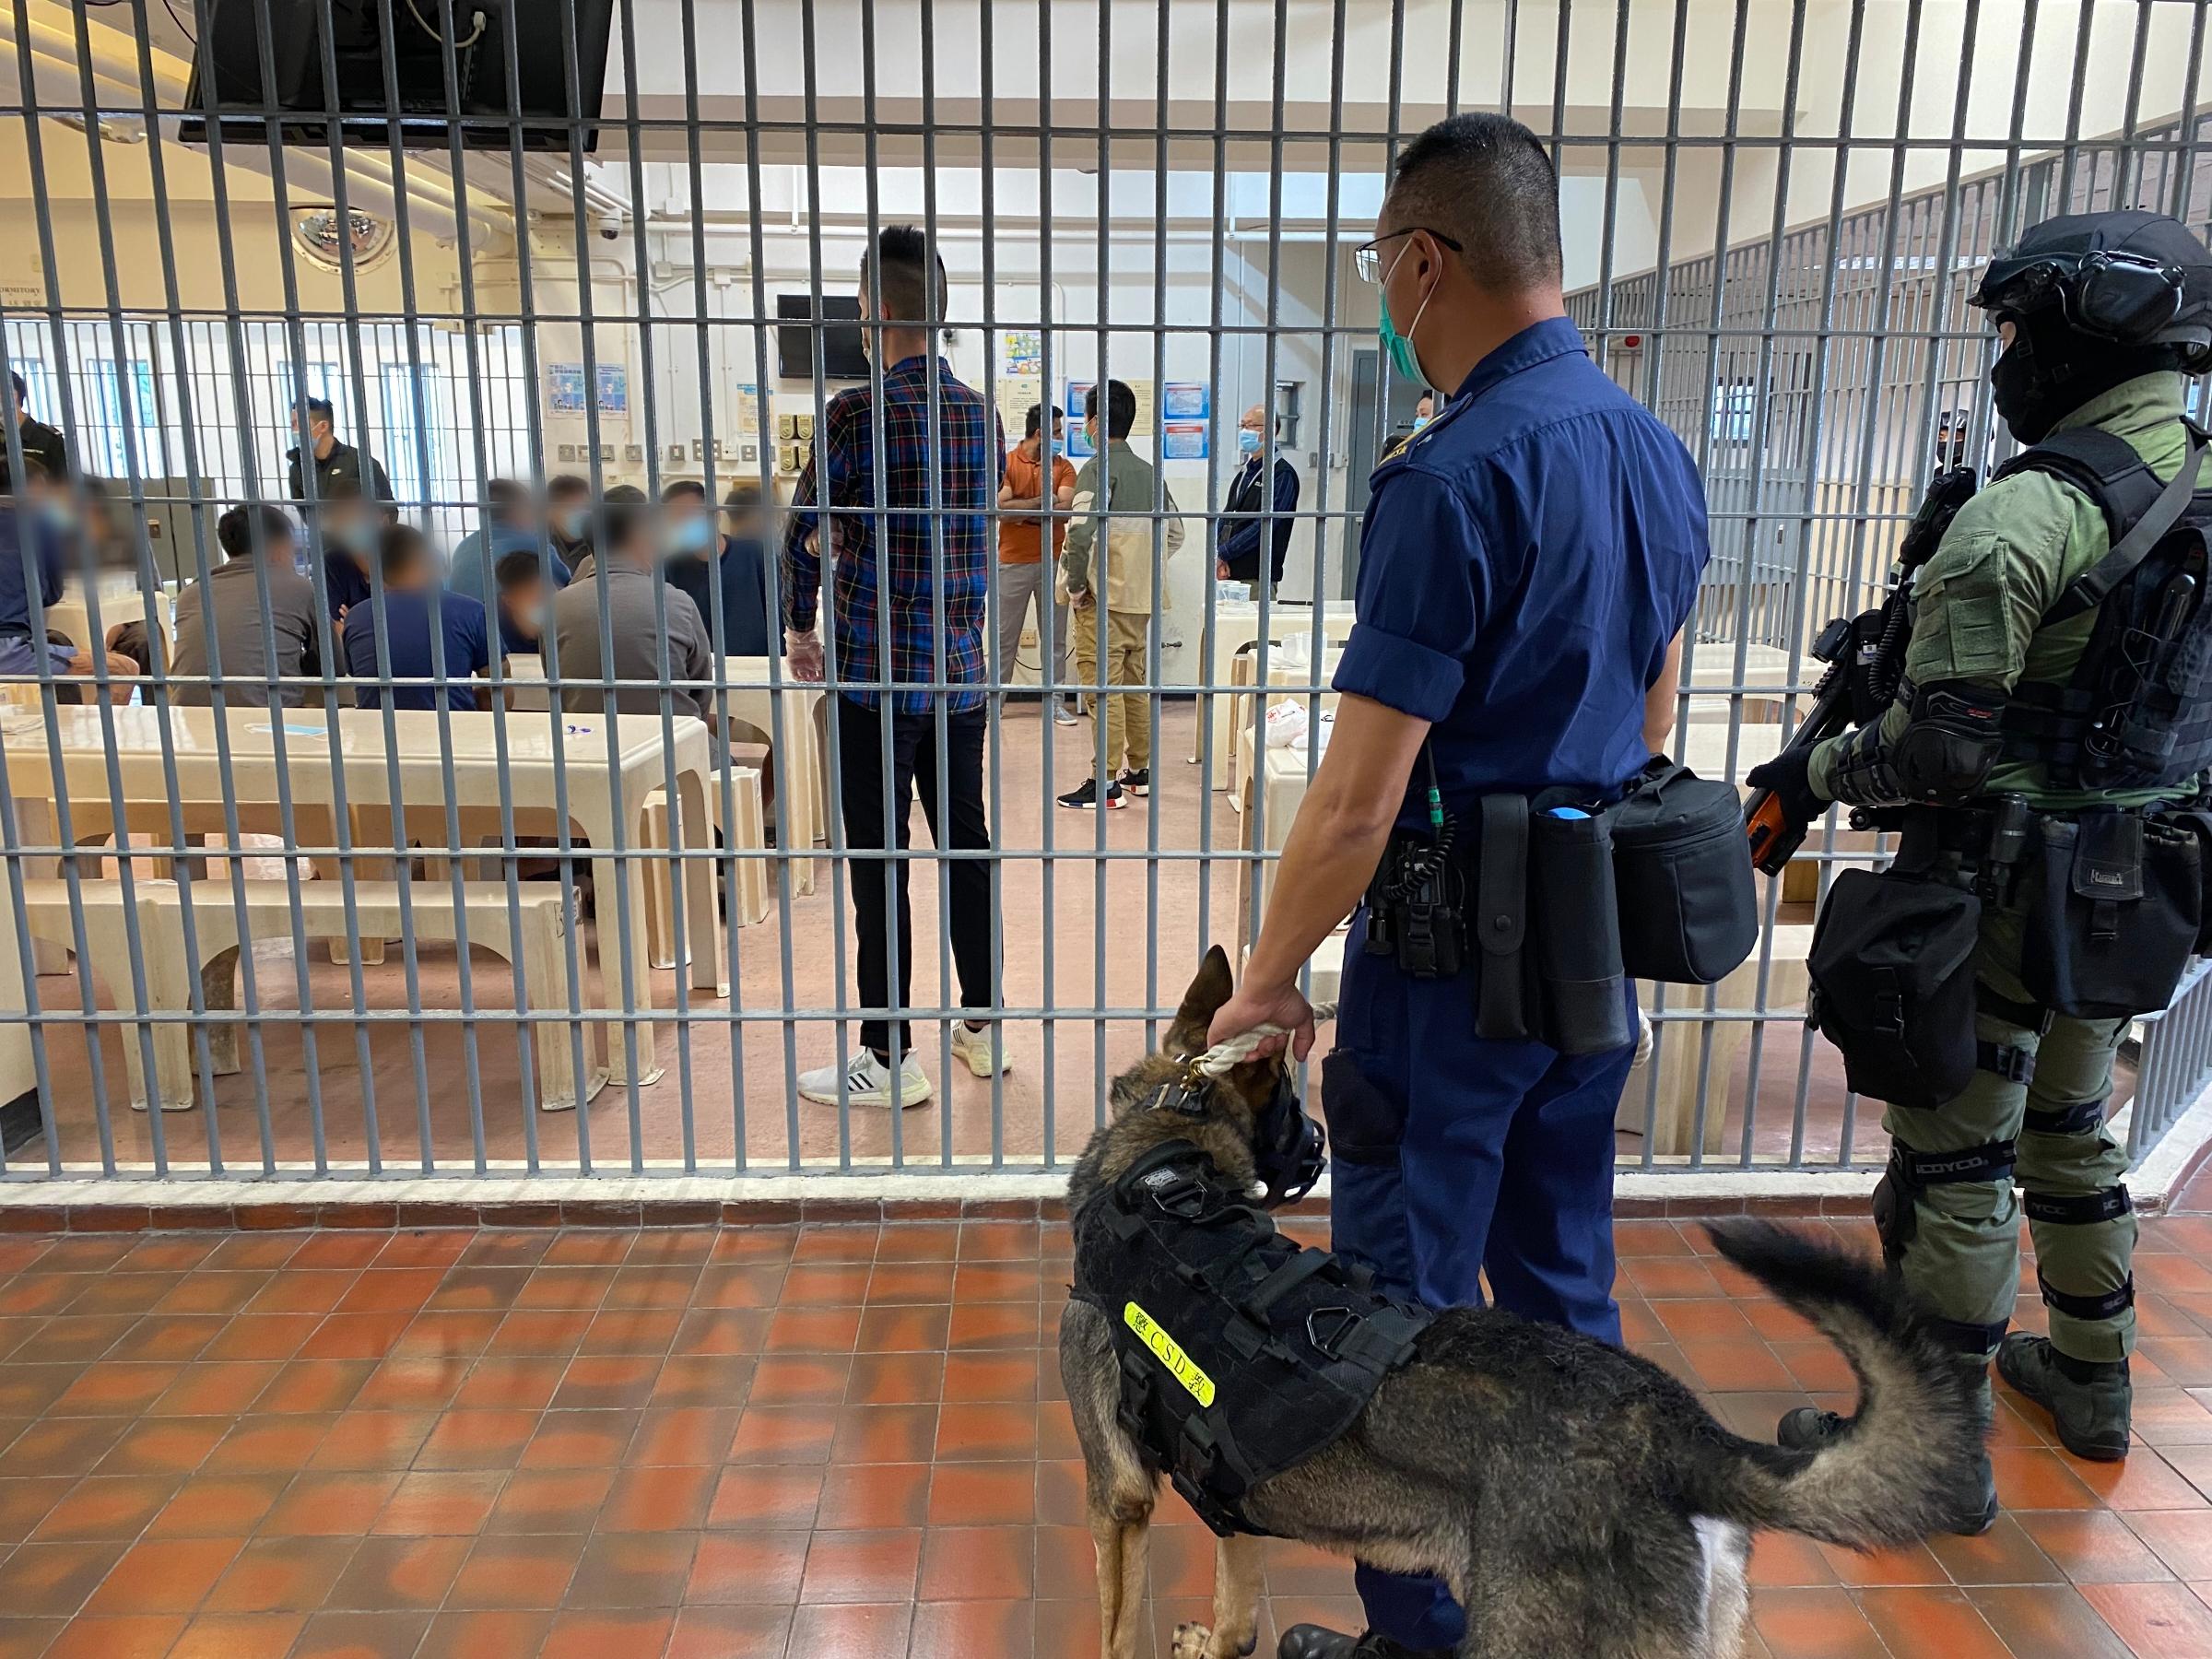 The Correctional Services Department today (December 9) launched an operation to combat illicit activities of persons in custody at Tung Tau Correctional Institution. Photo shows members of the Regional Response Team and the Dog Unit being deployed as backup at Tung Tau Correctional Institution.